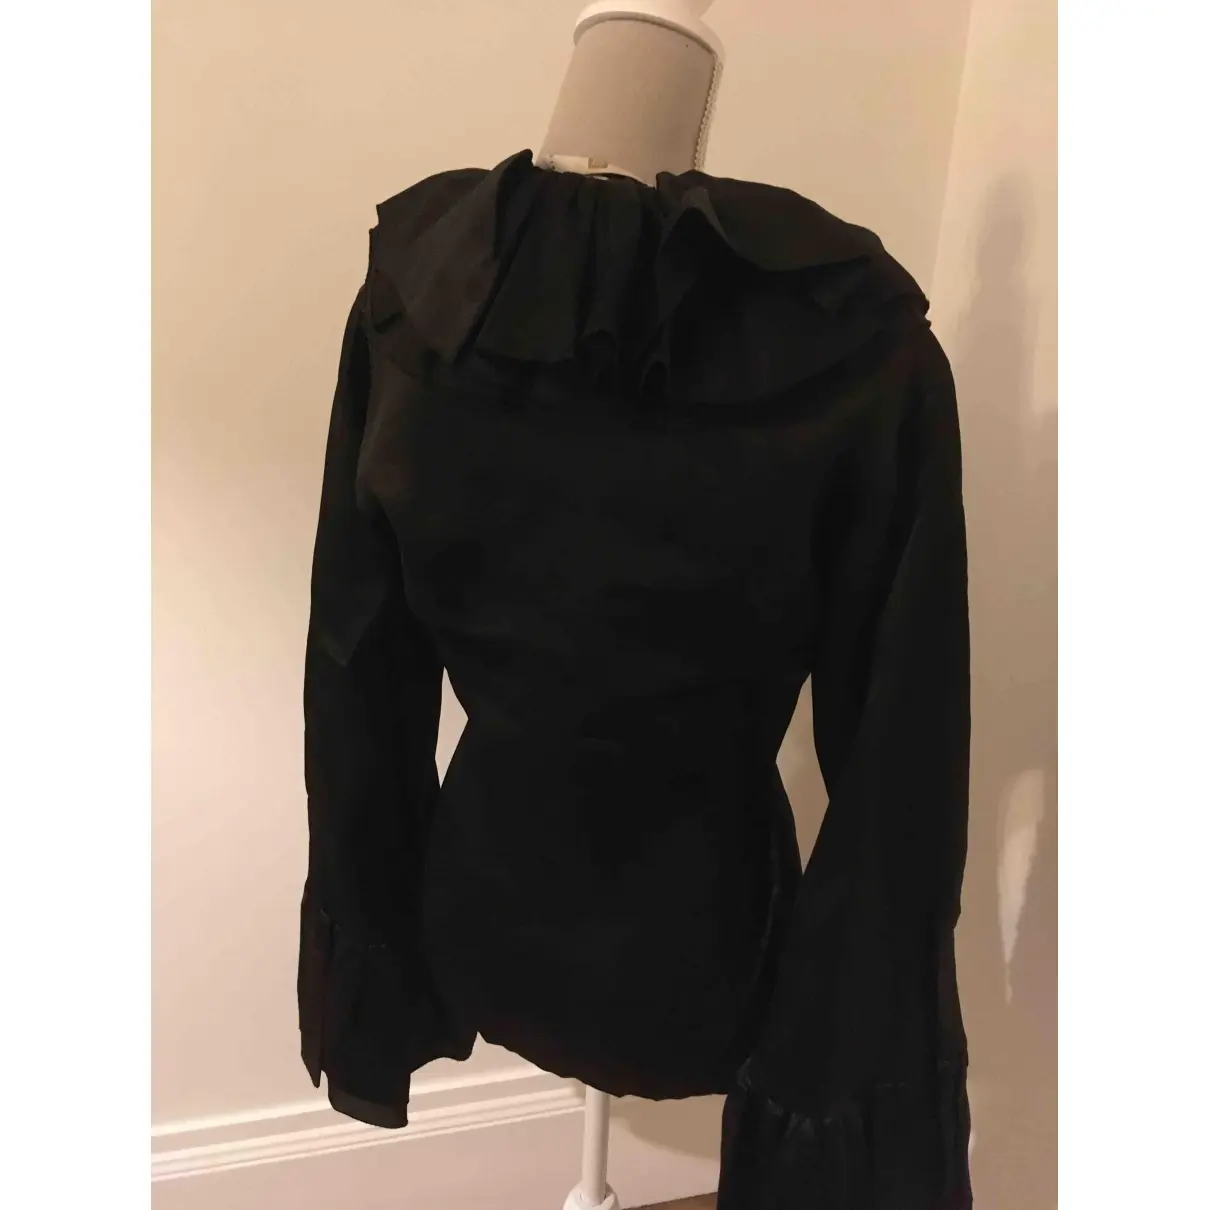 Givenchy Silk blouse for sale - Vintage